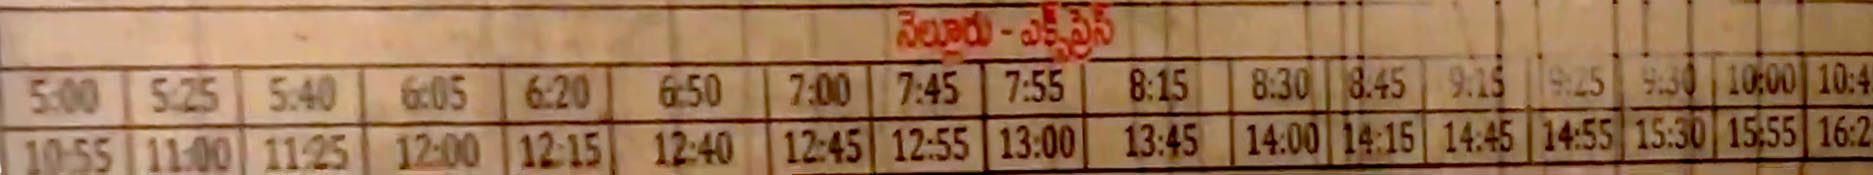 Badvel to Nellore Express Bus Timings